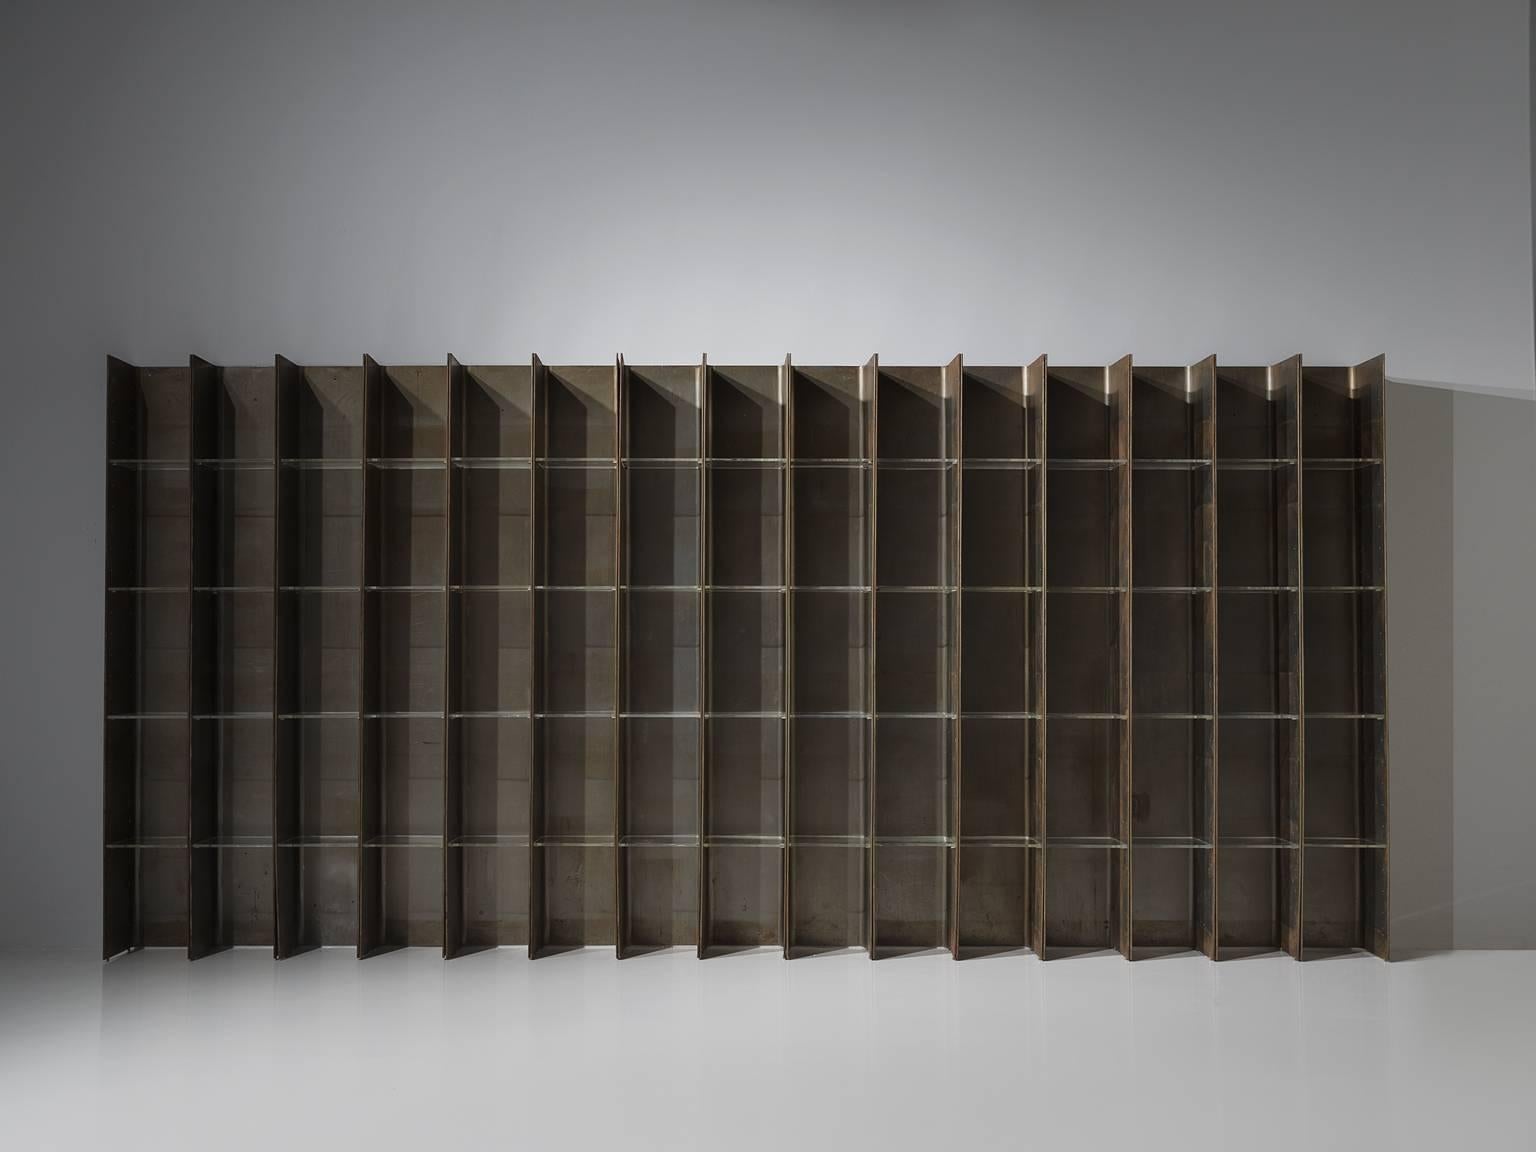 Carla Venosta & Guido Zimmerman for Arflex, bookcase 'Valiant', in steel and plexiglass, Italy, 1971. 

This steel bookcase with plexiglass shelves has a clean and geometric design which is emphasized by the rawness of the materials. The steel